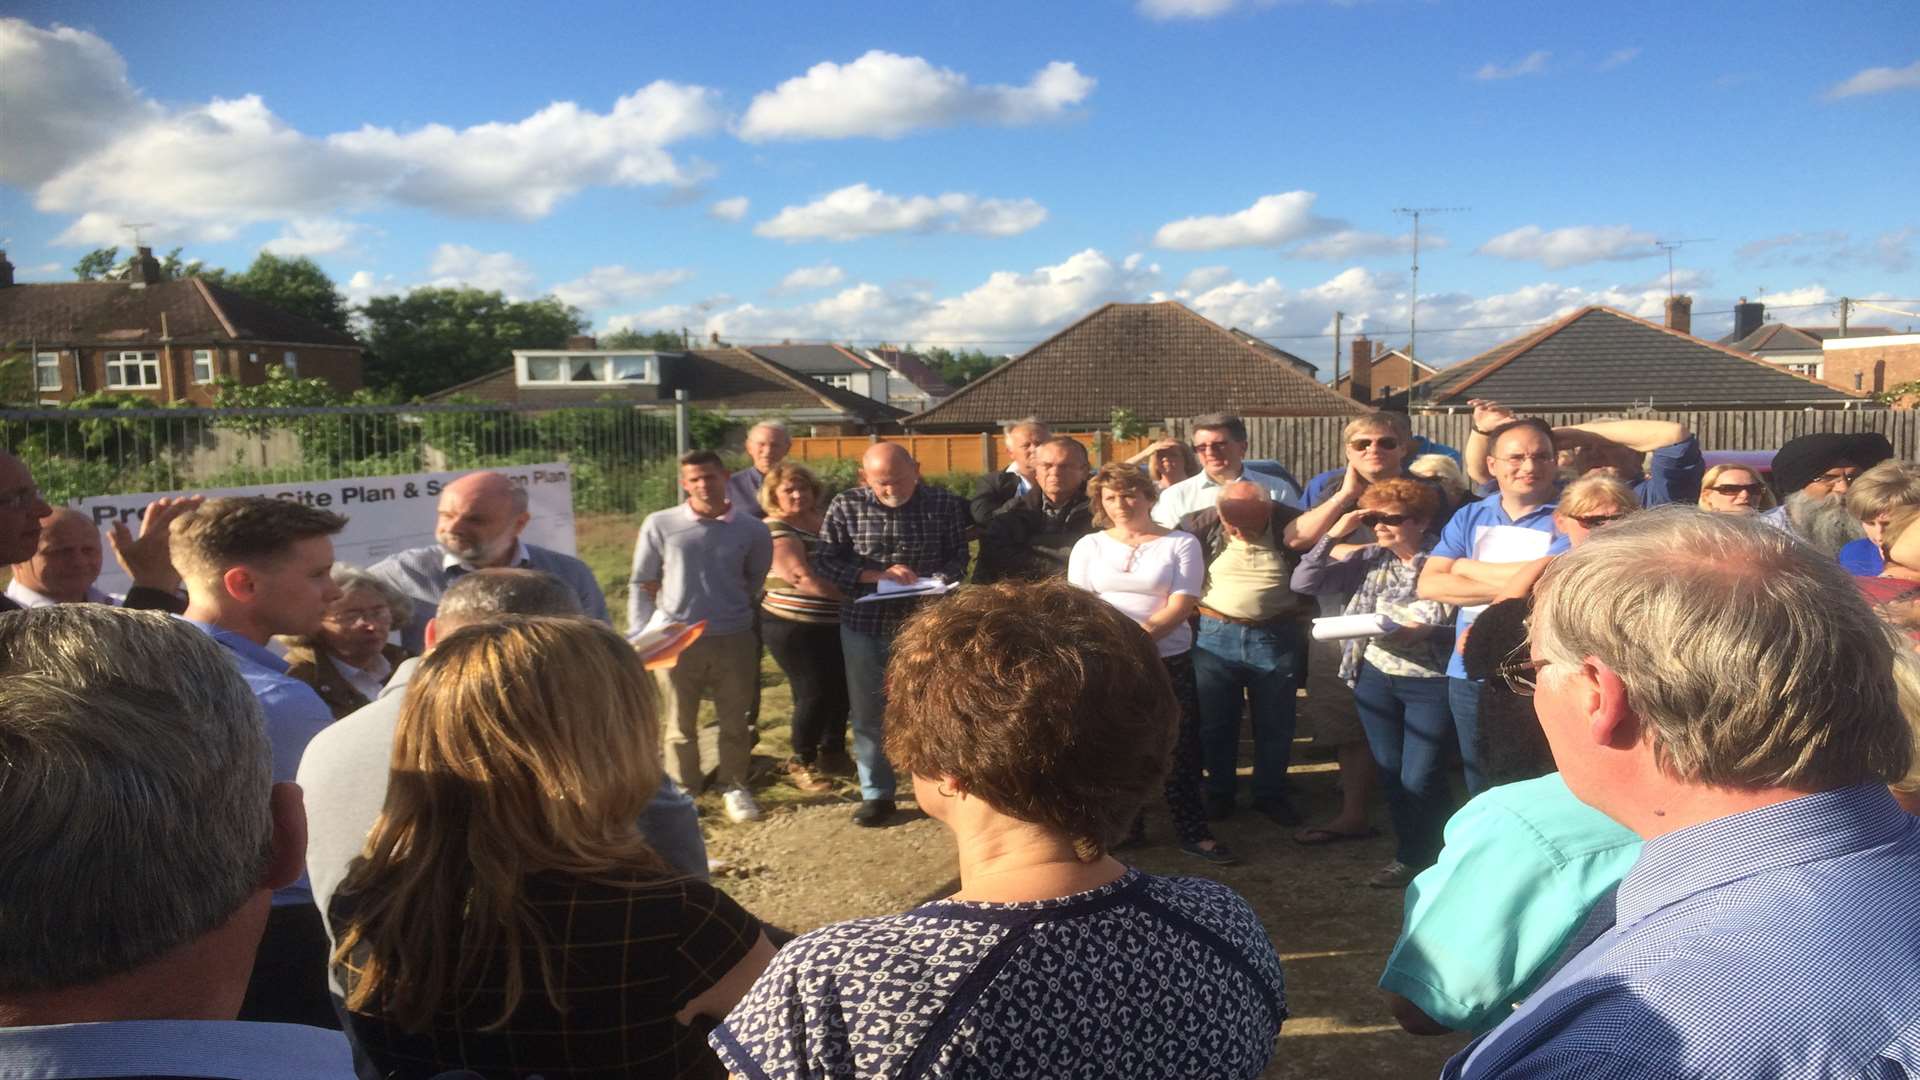 Residents gathered to show anger at plans for the housing development in Berengrave Lane